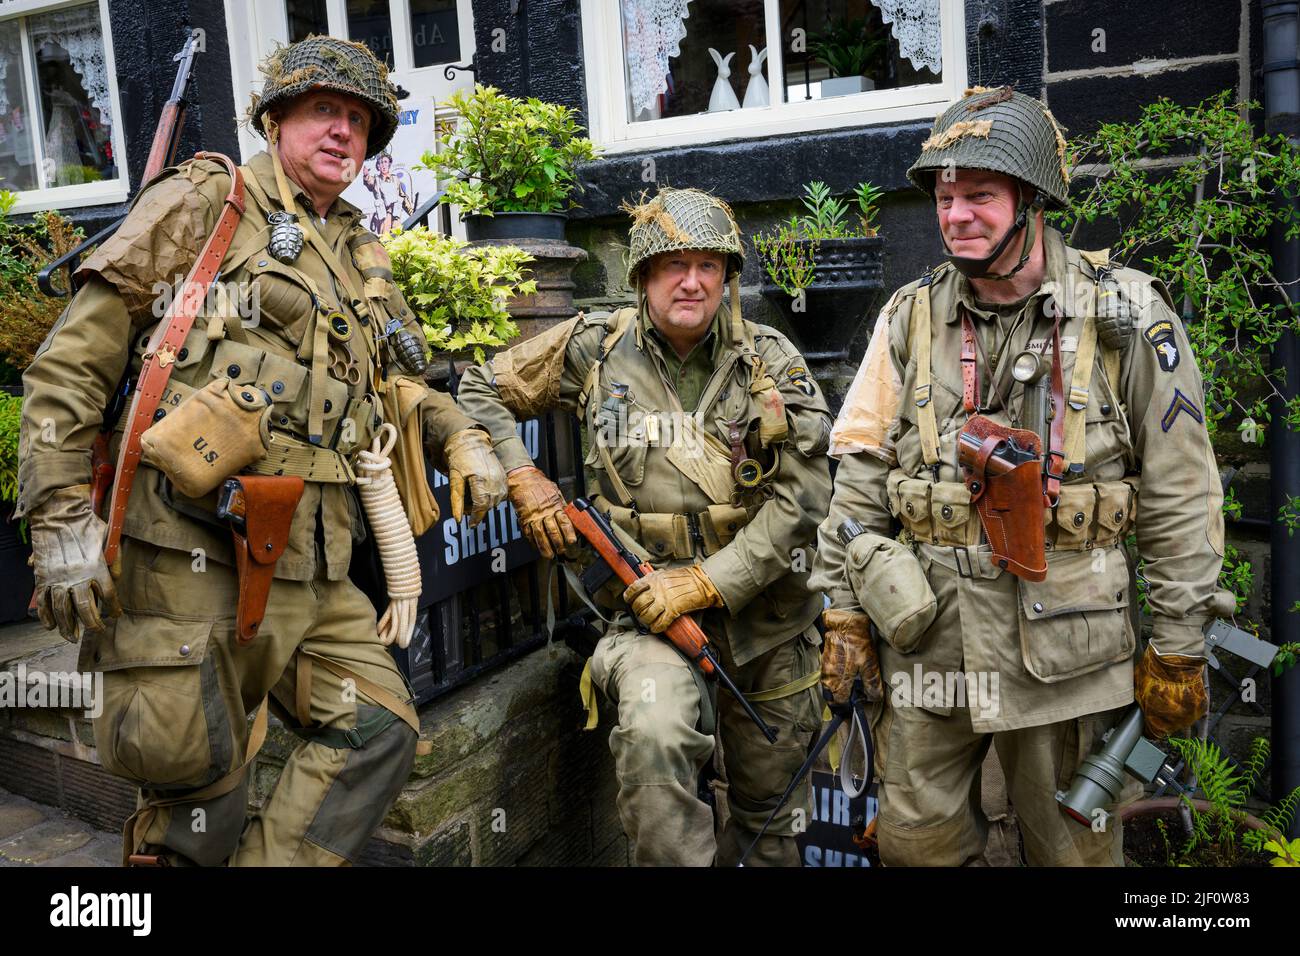 Haworth 1940's weekend (men in khaki WW2 costume as soldiers of 101st Airborne Division 'Screaming Eagles') - Main Street, West Yorkshire, England UK. Stock Photo